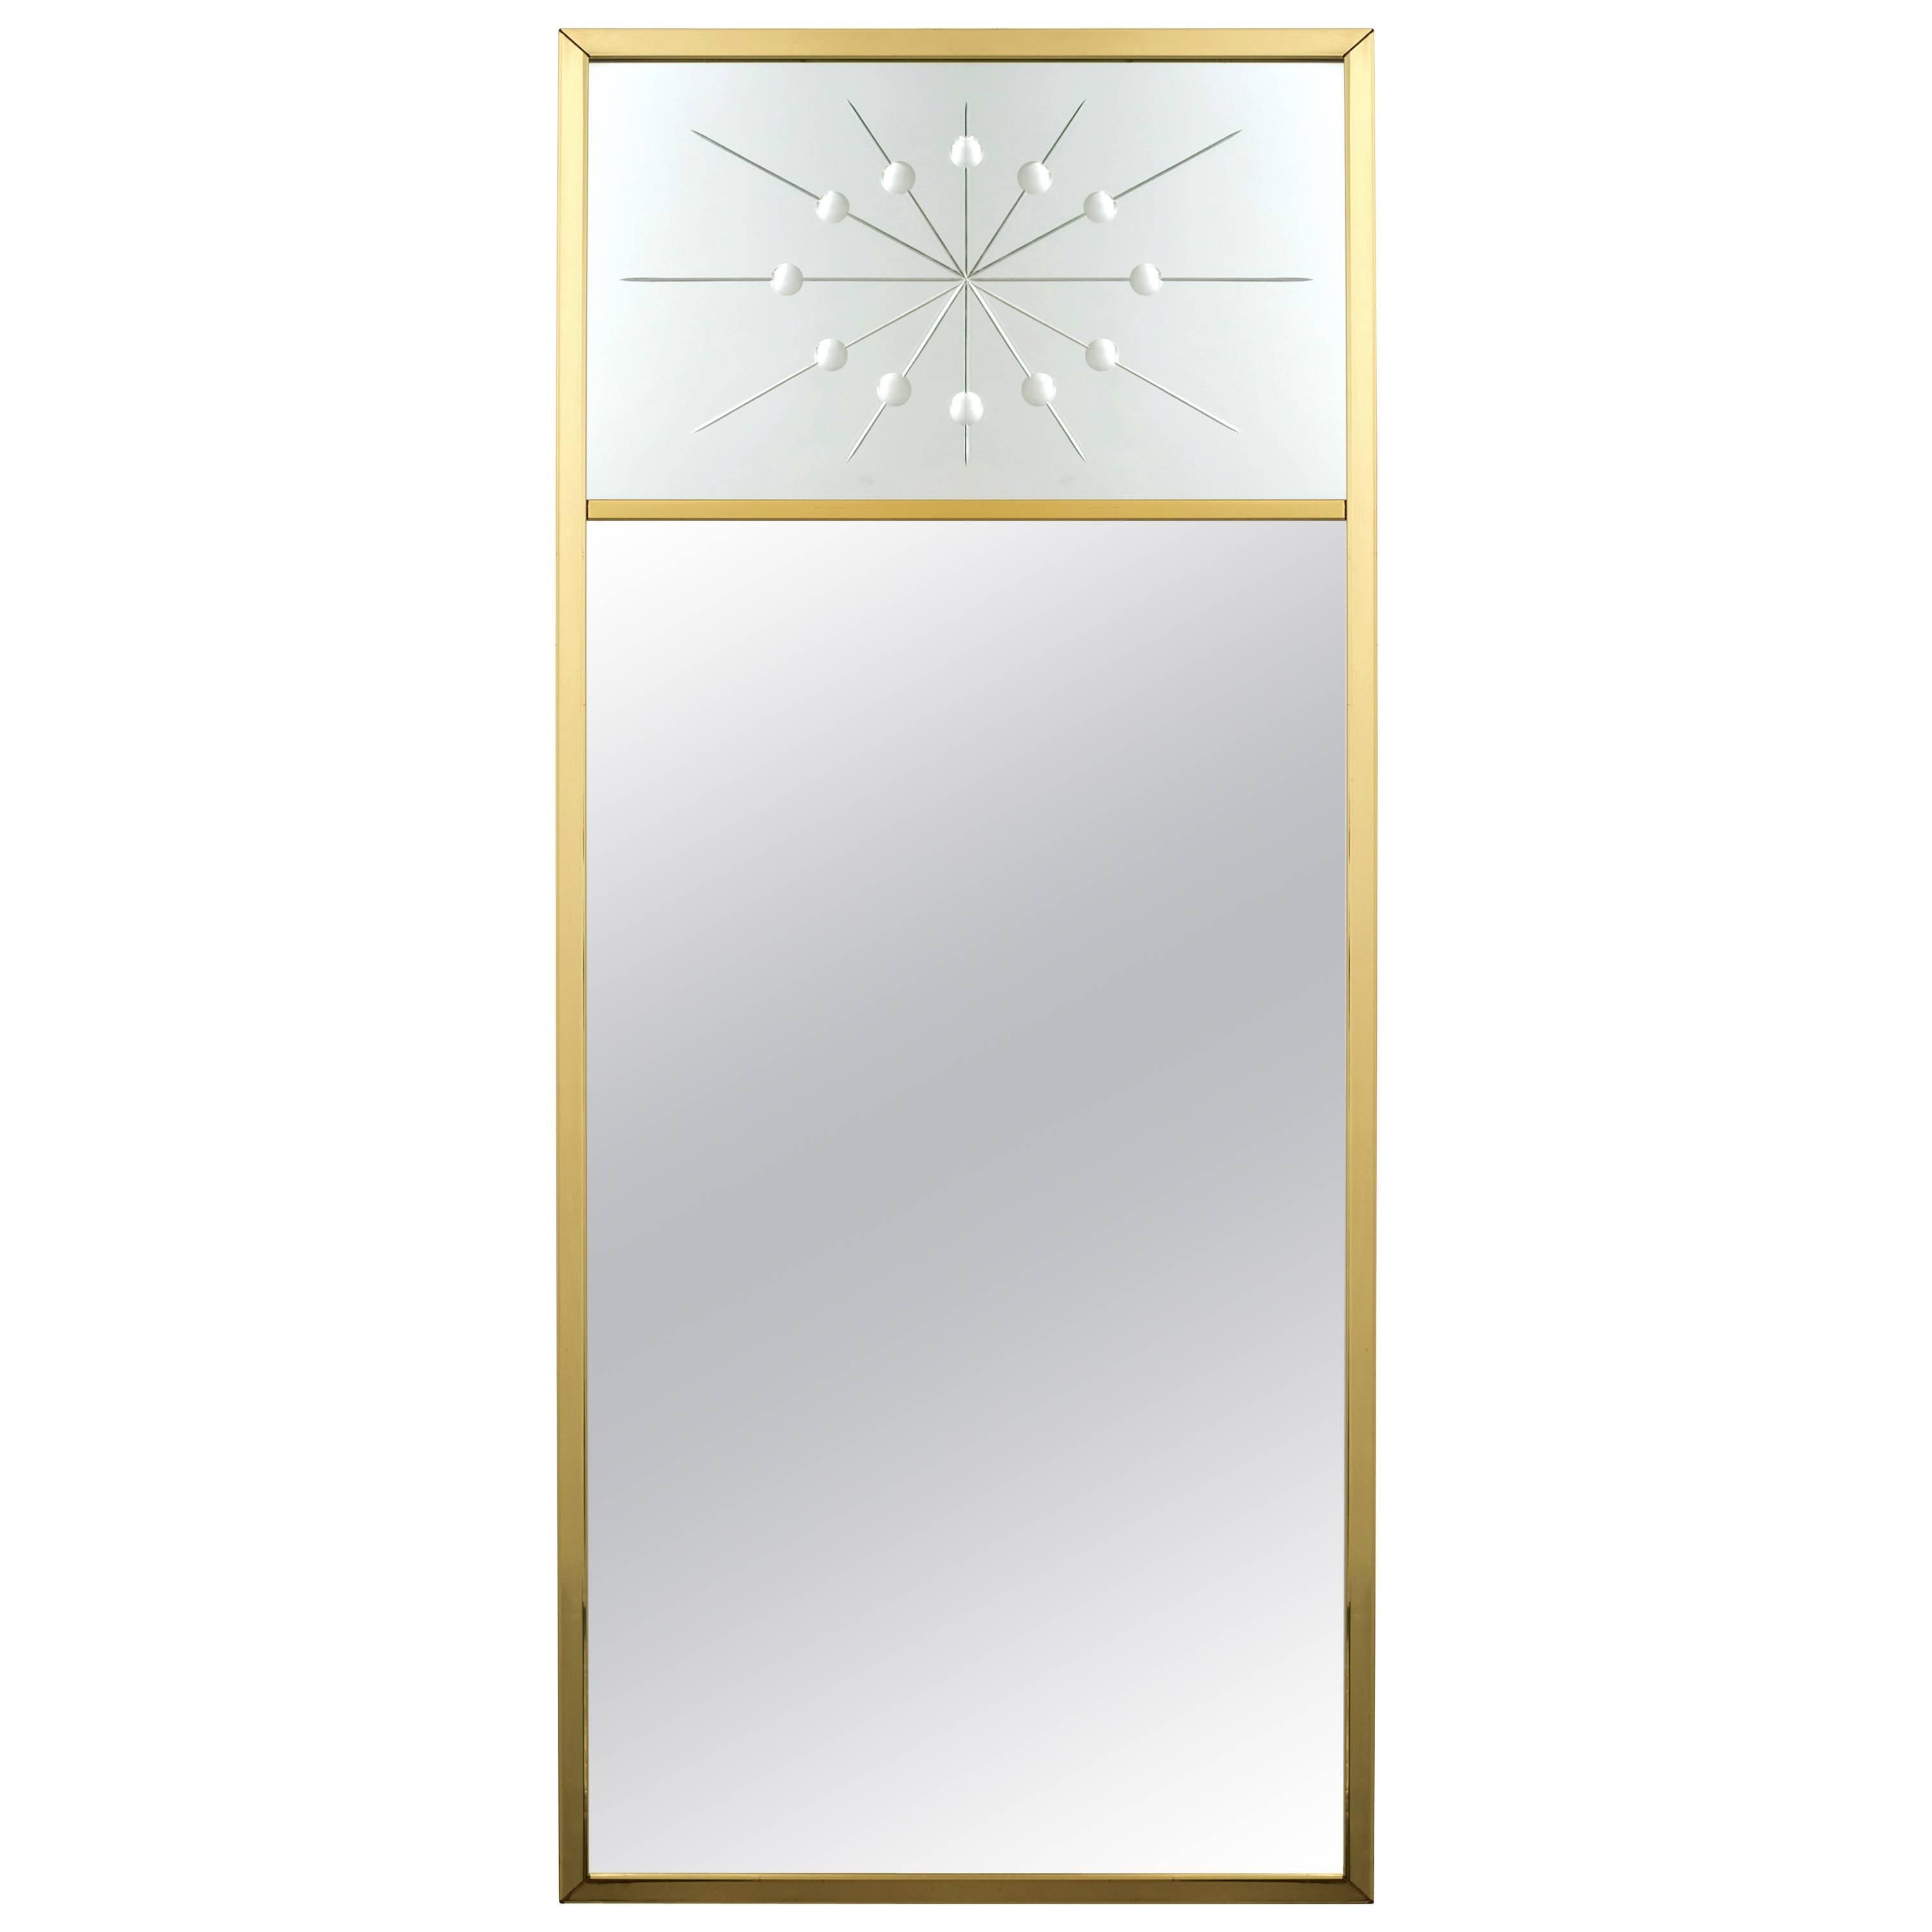 1960s Brass Wall Mirror with Atomic Design Motif After Tommi Parzinger  For Sale